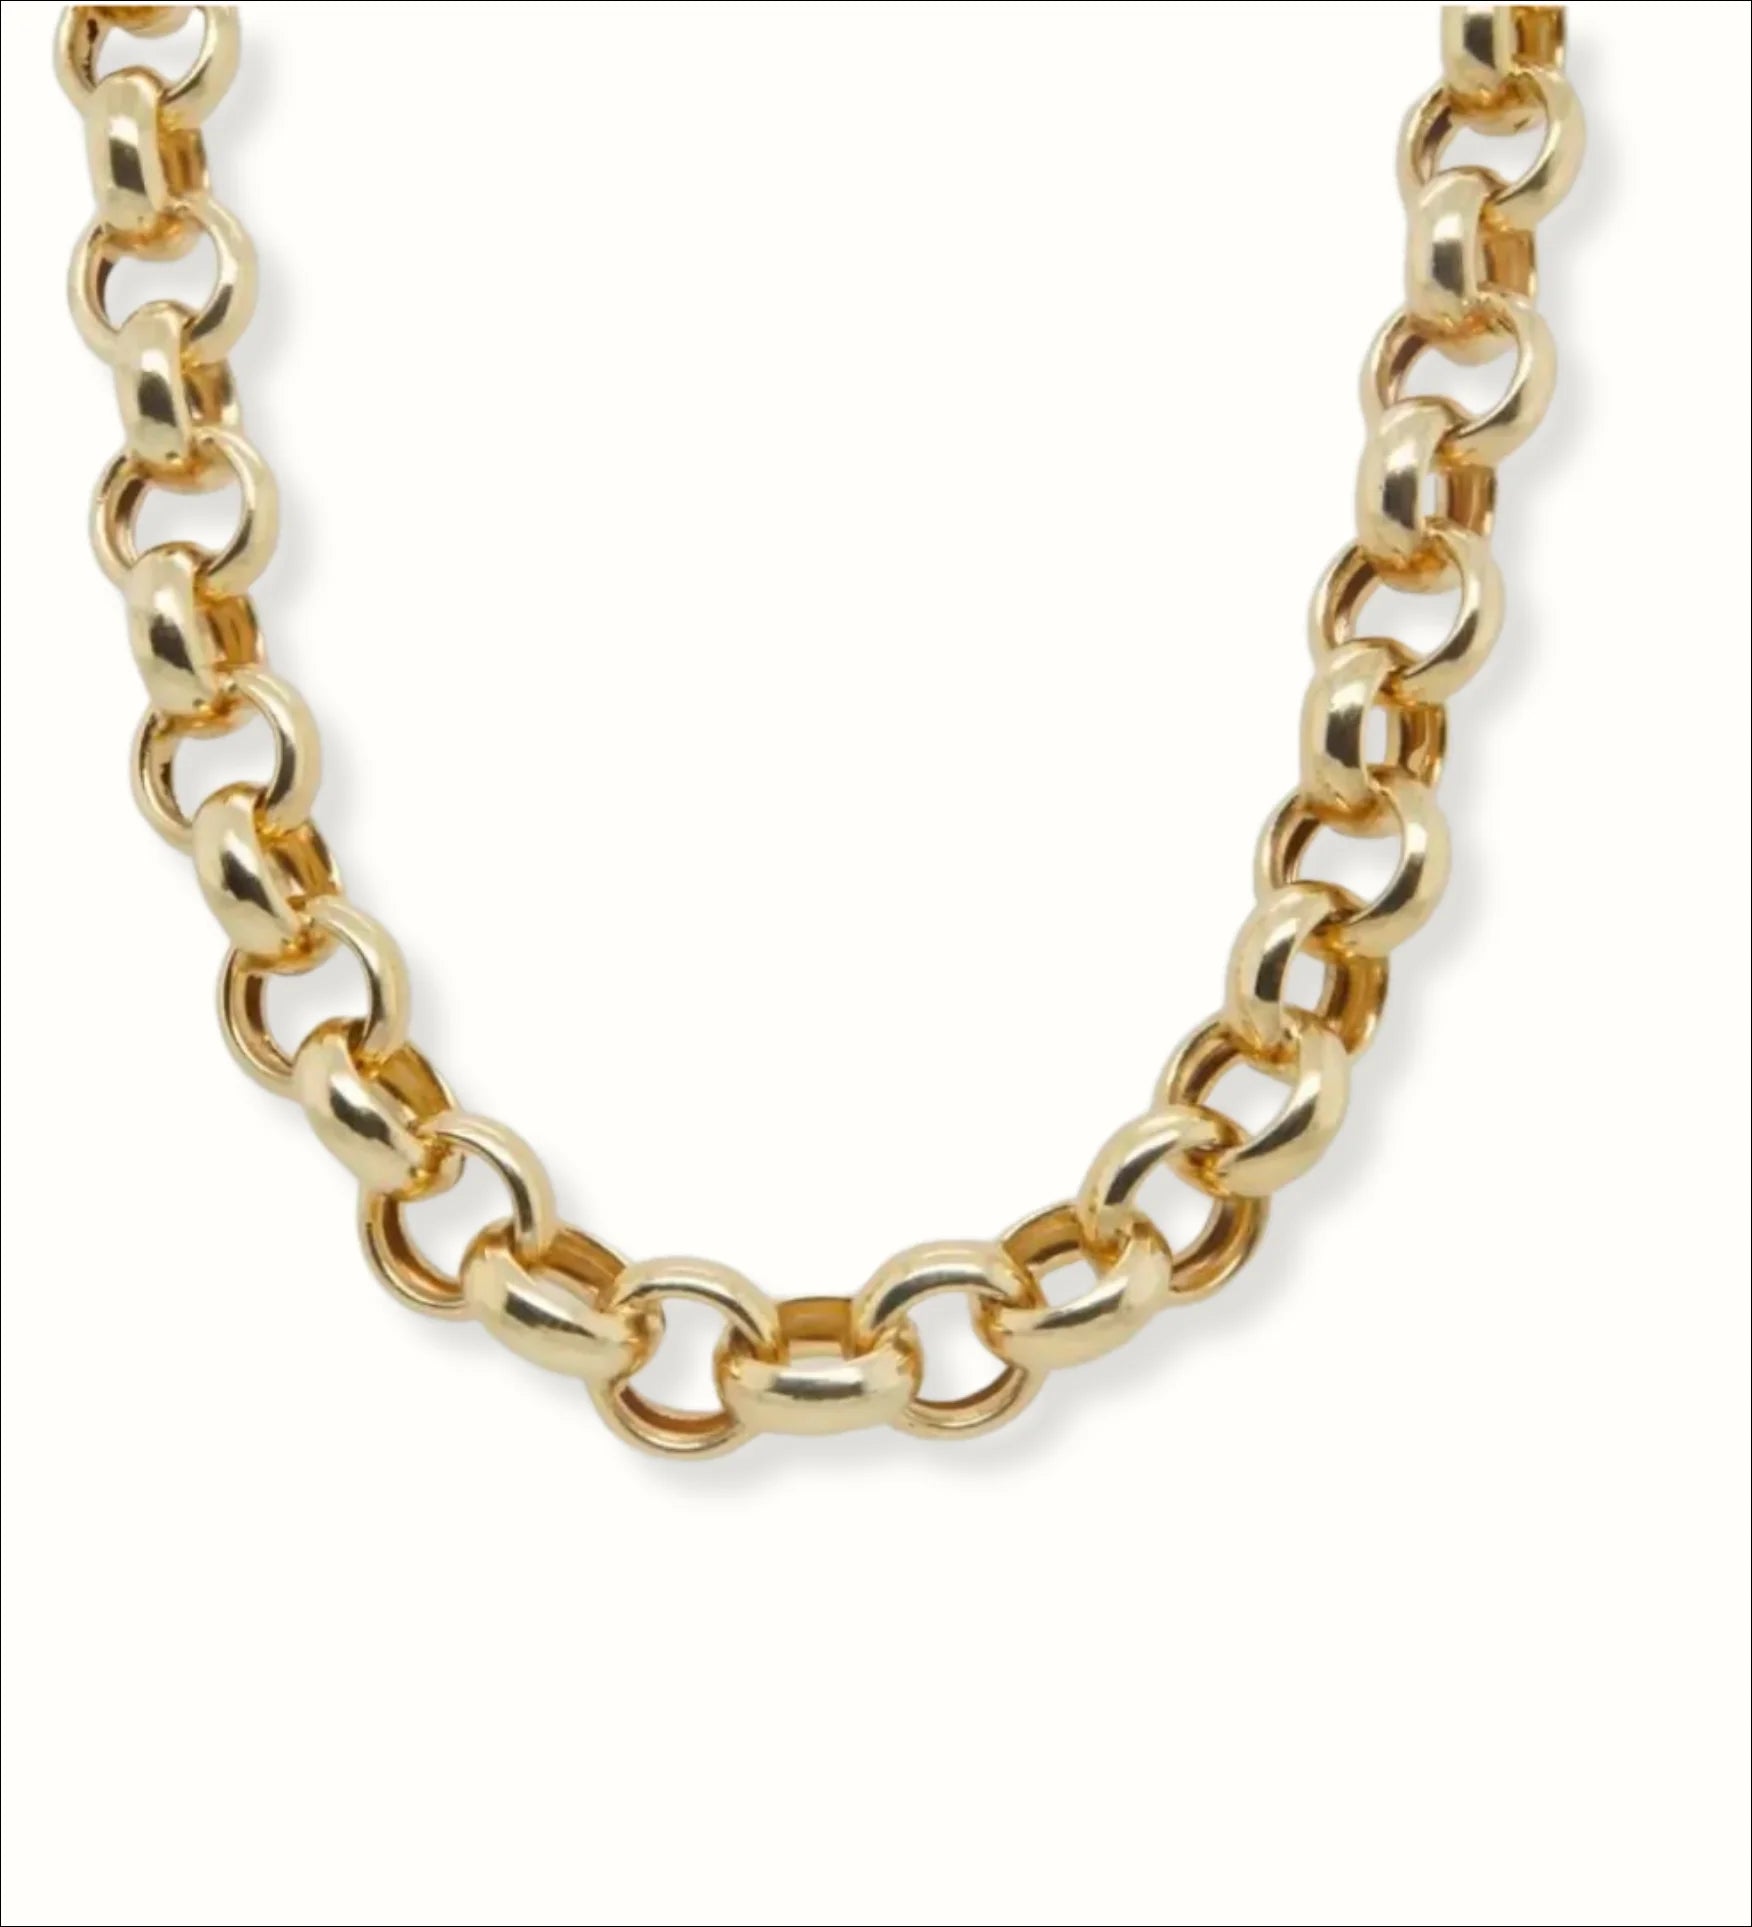 ’Exquisite 18k Gold Chain - Art Jewelry’ | Above $1000